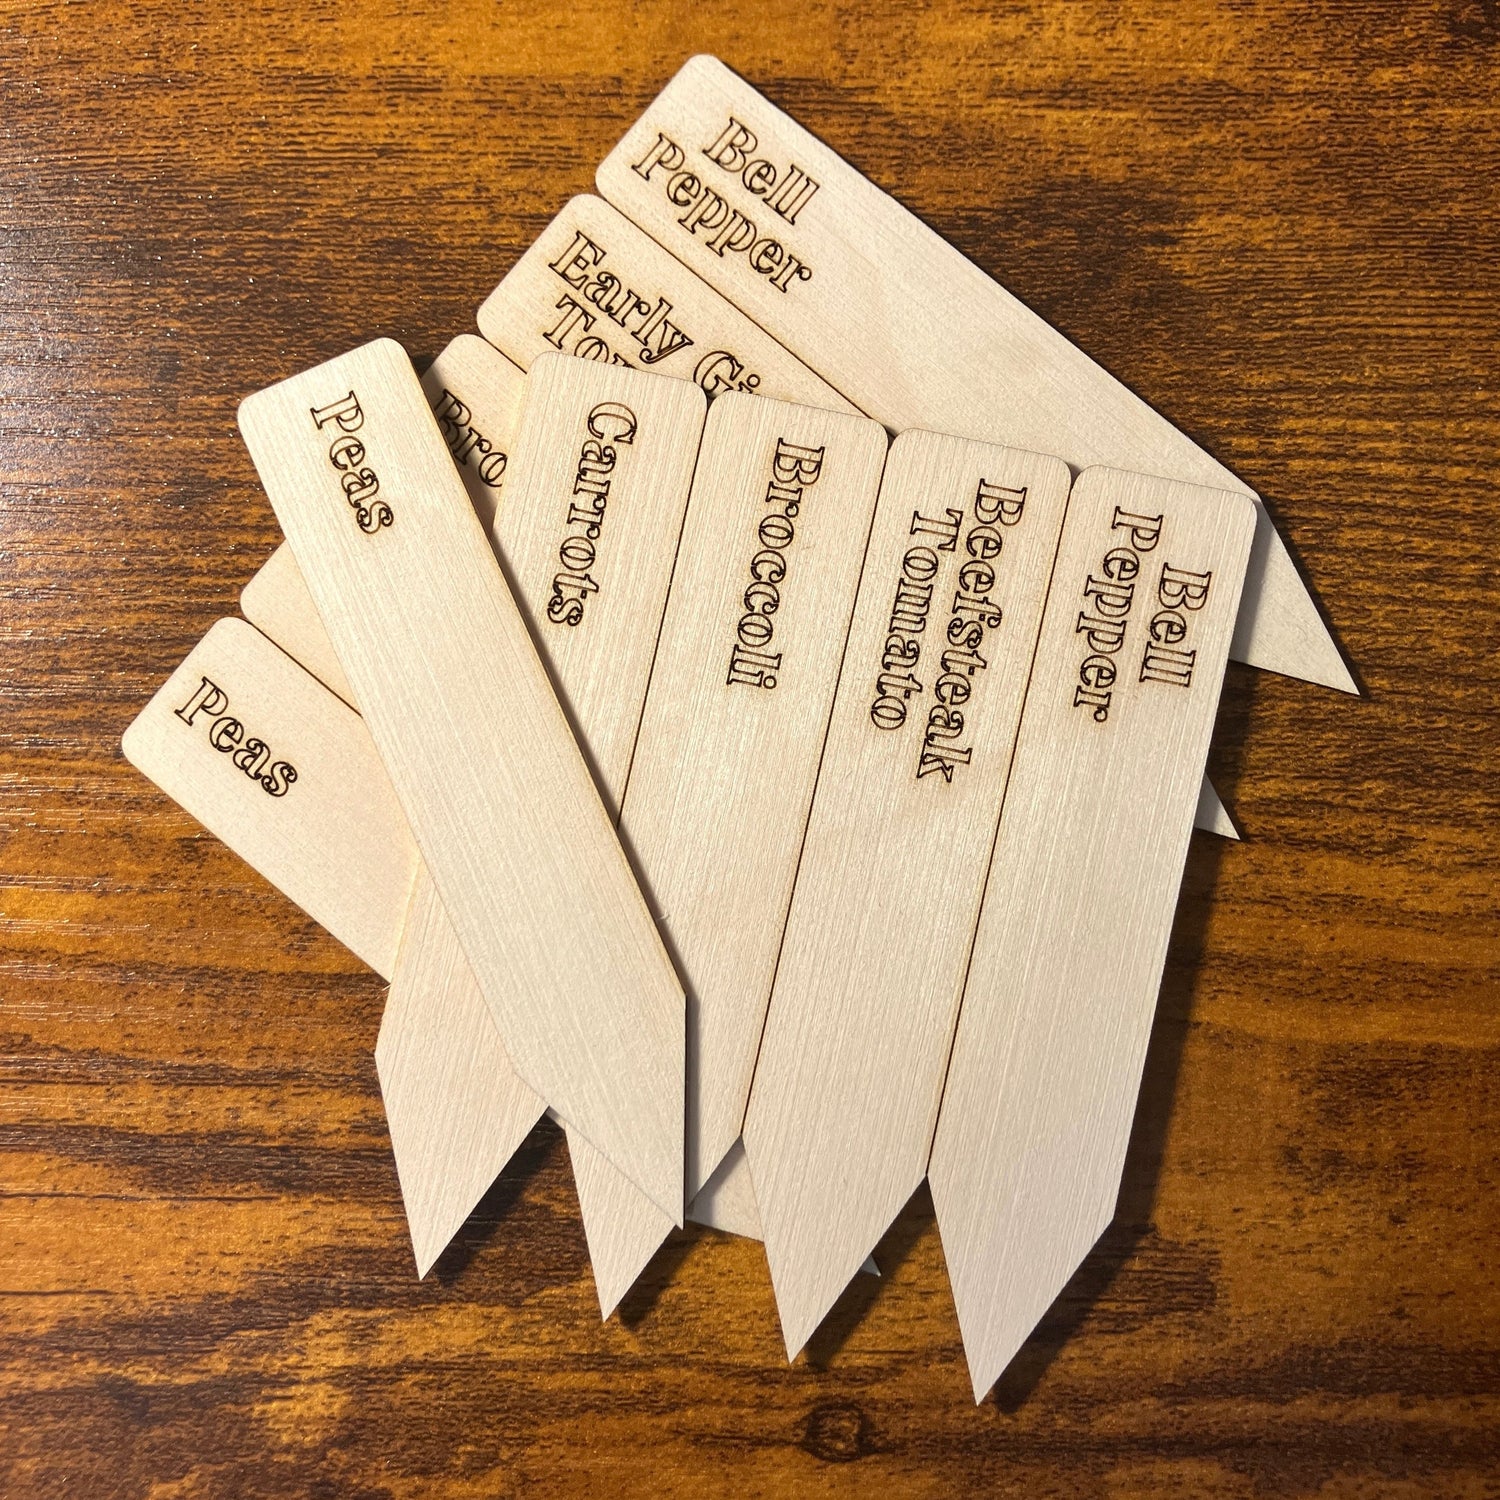 Personalized vegetable plant garden markers arrive in sheets of 10 for you to break off and mark your variety location in your garden or starter pots.